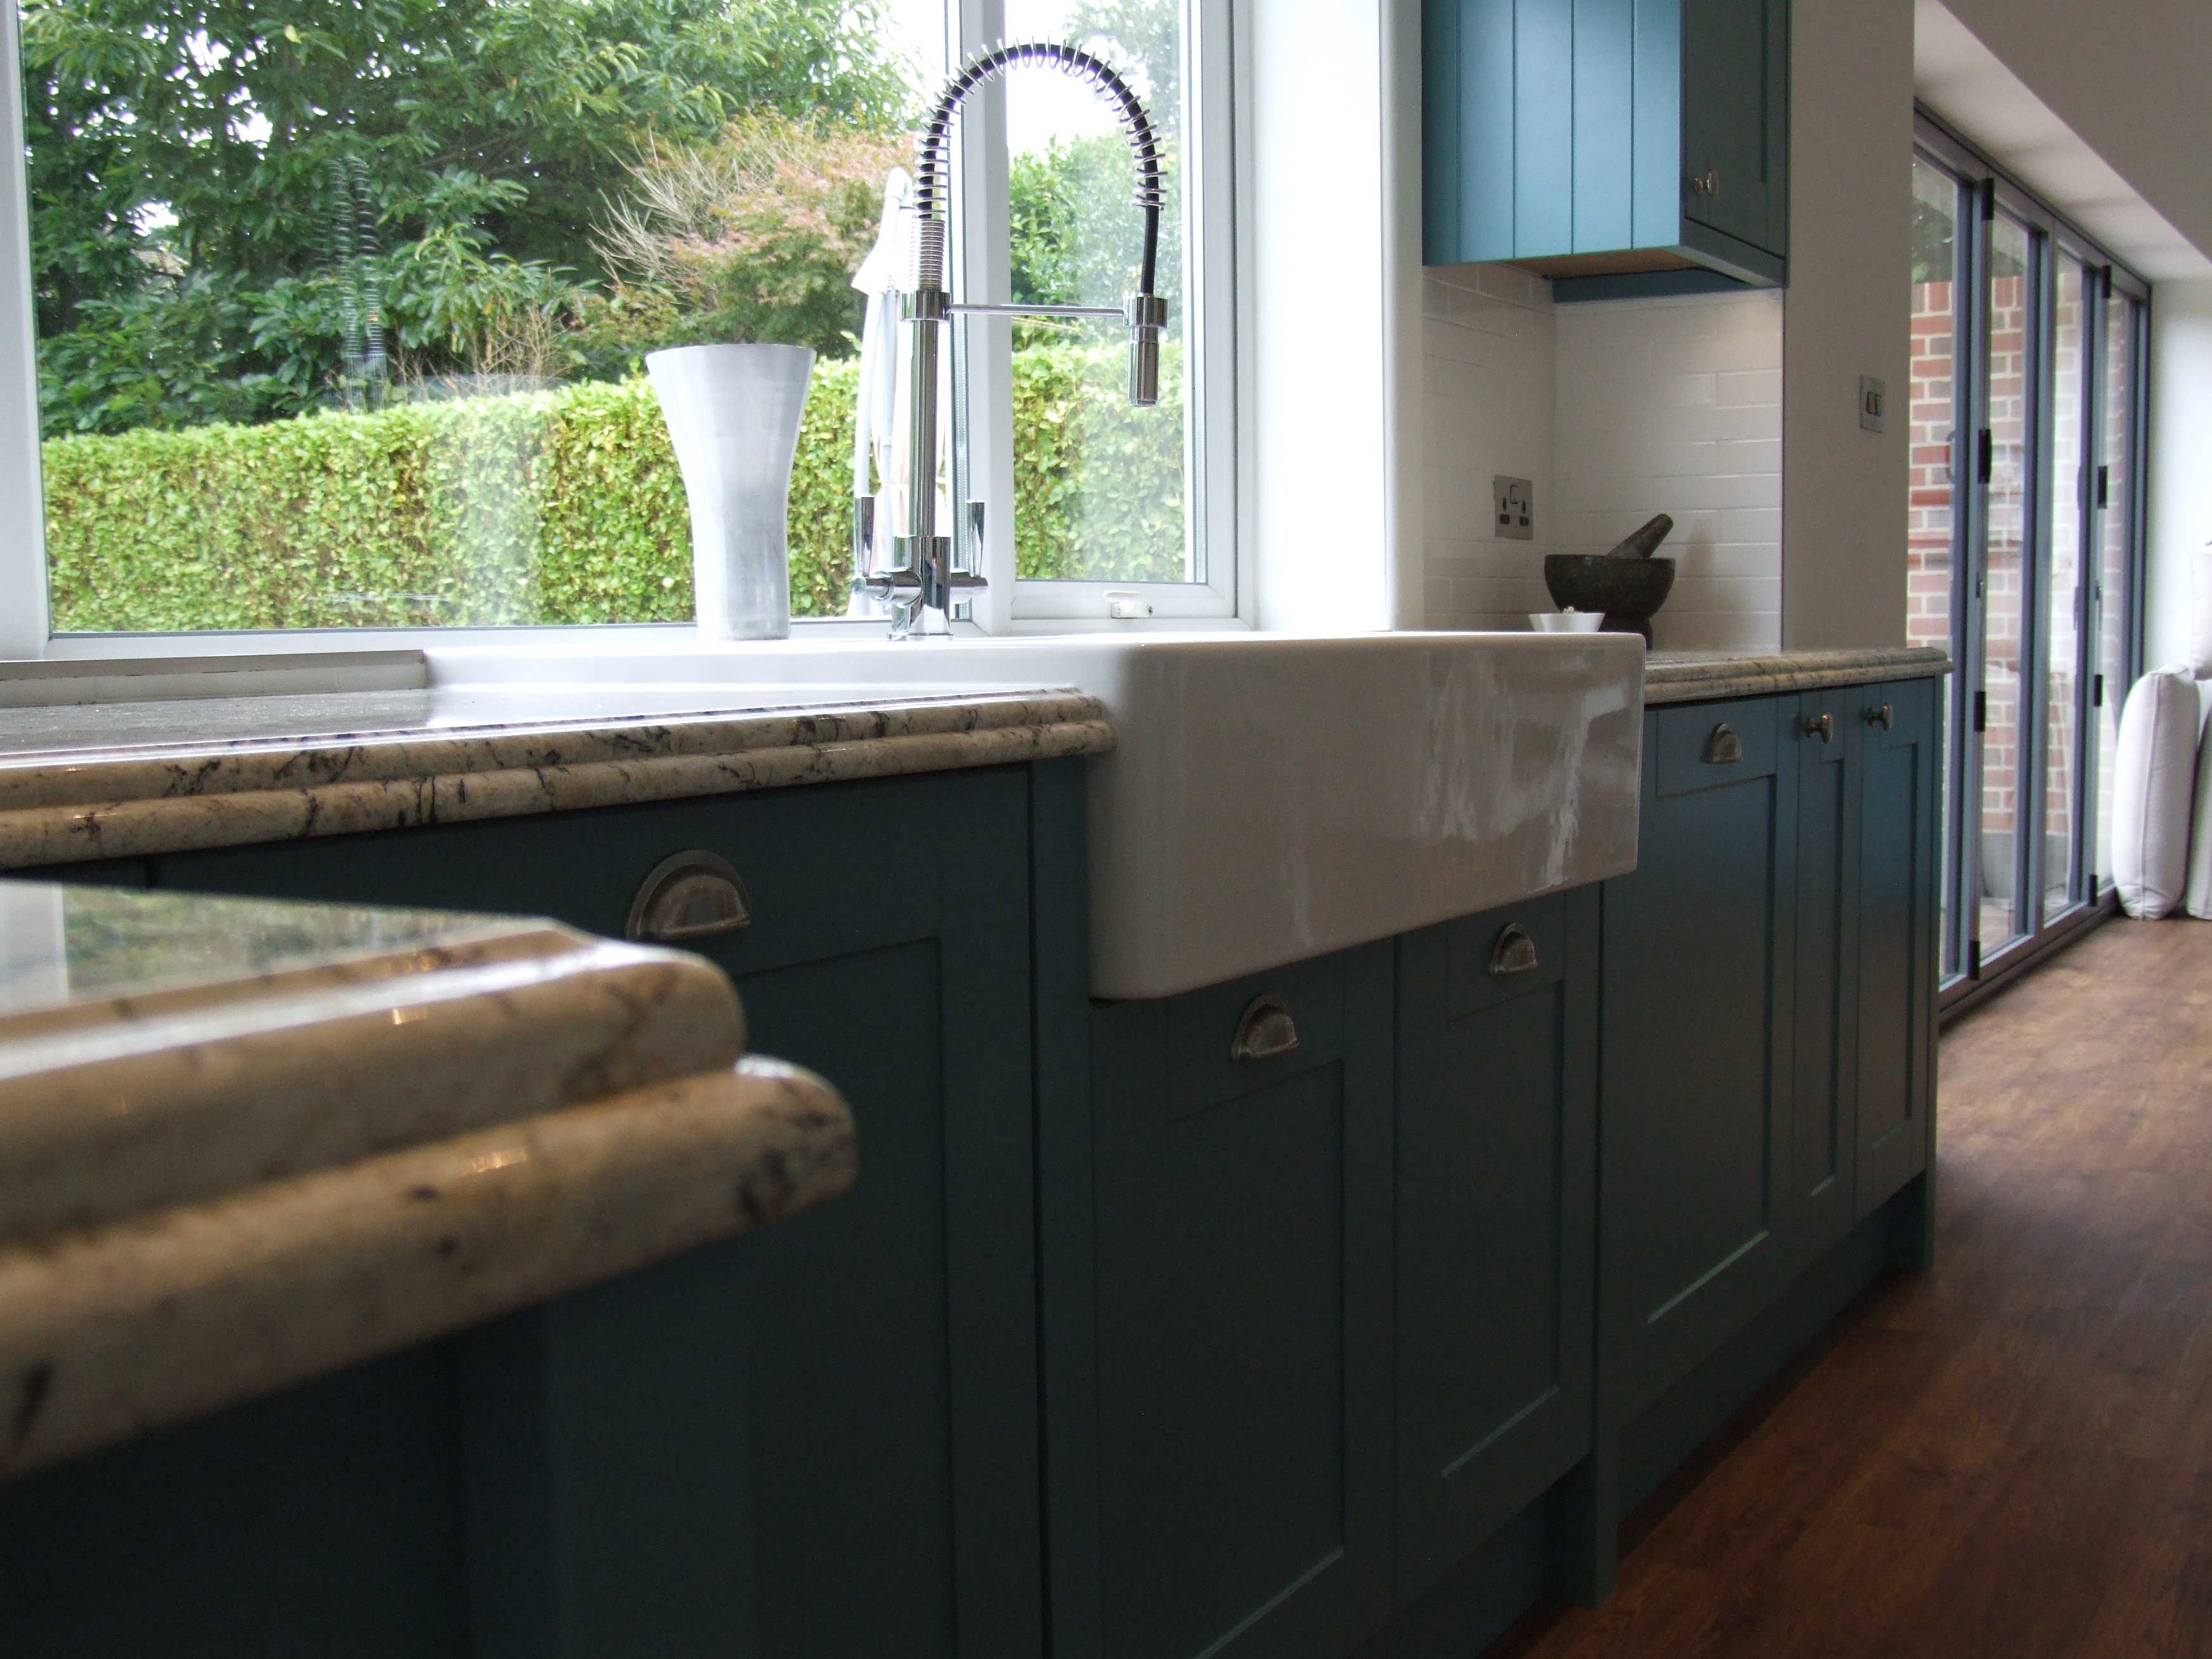 Painted teal kitchen with marble worktops